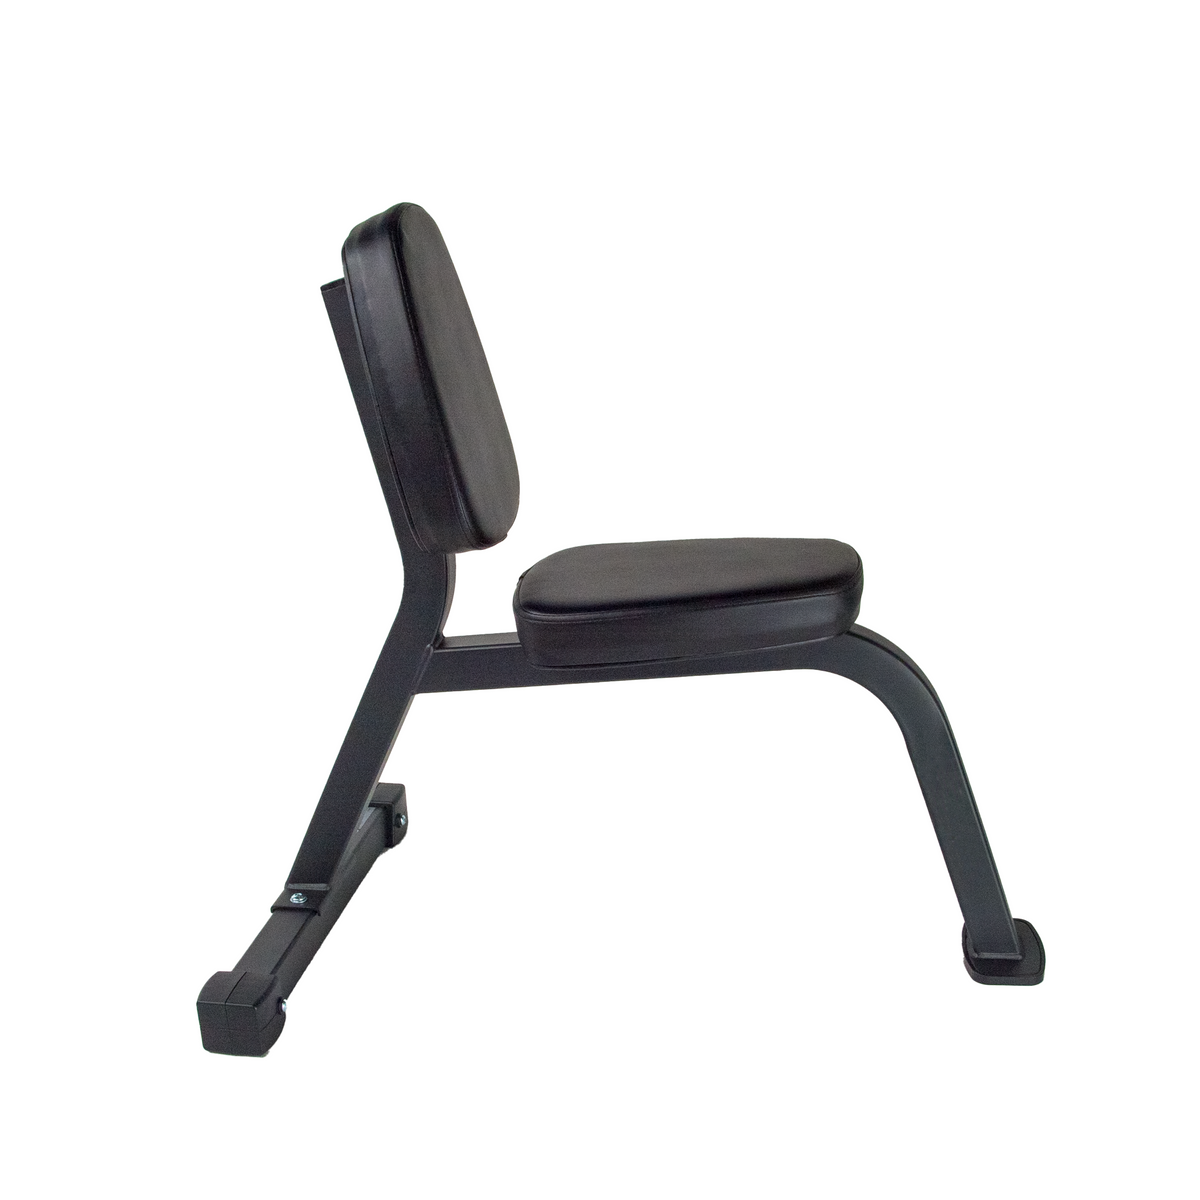 FITWAY Utility Bench